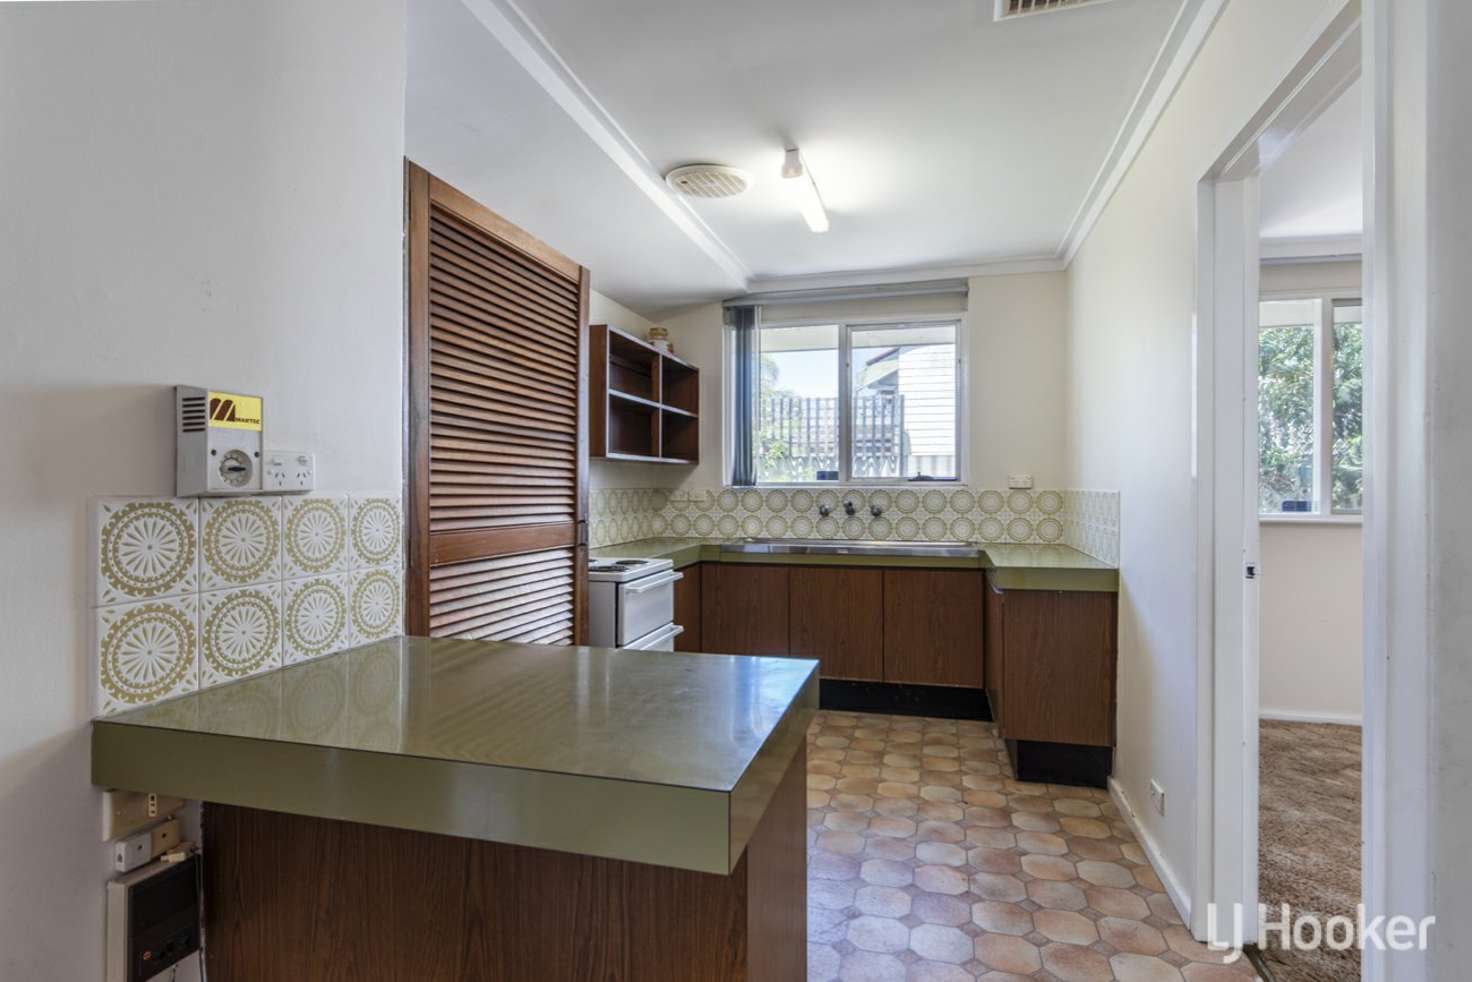 Main view of Homely house listing, 28 Currawong Way, Thornlie WA 6108